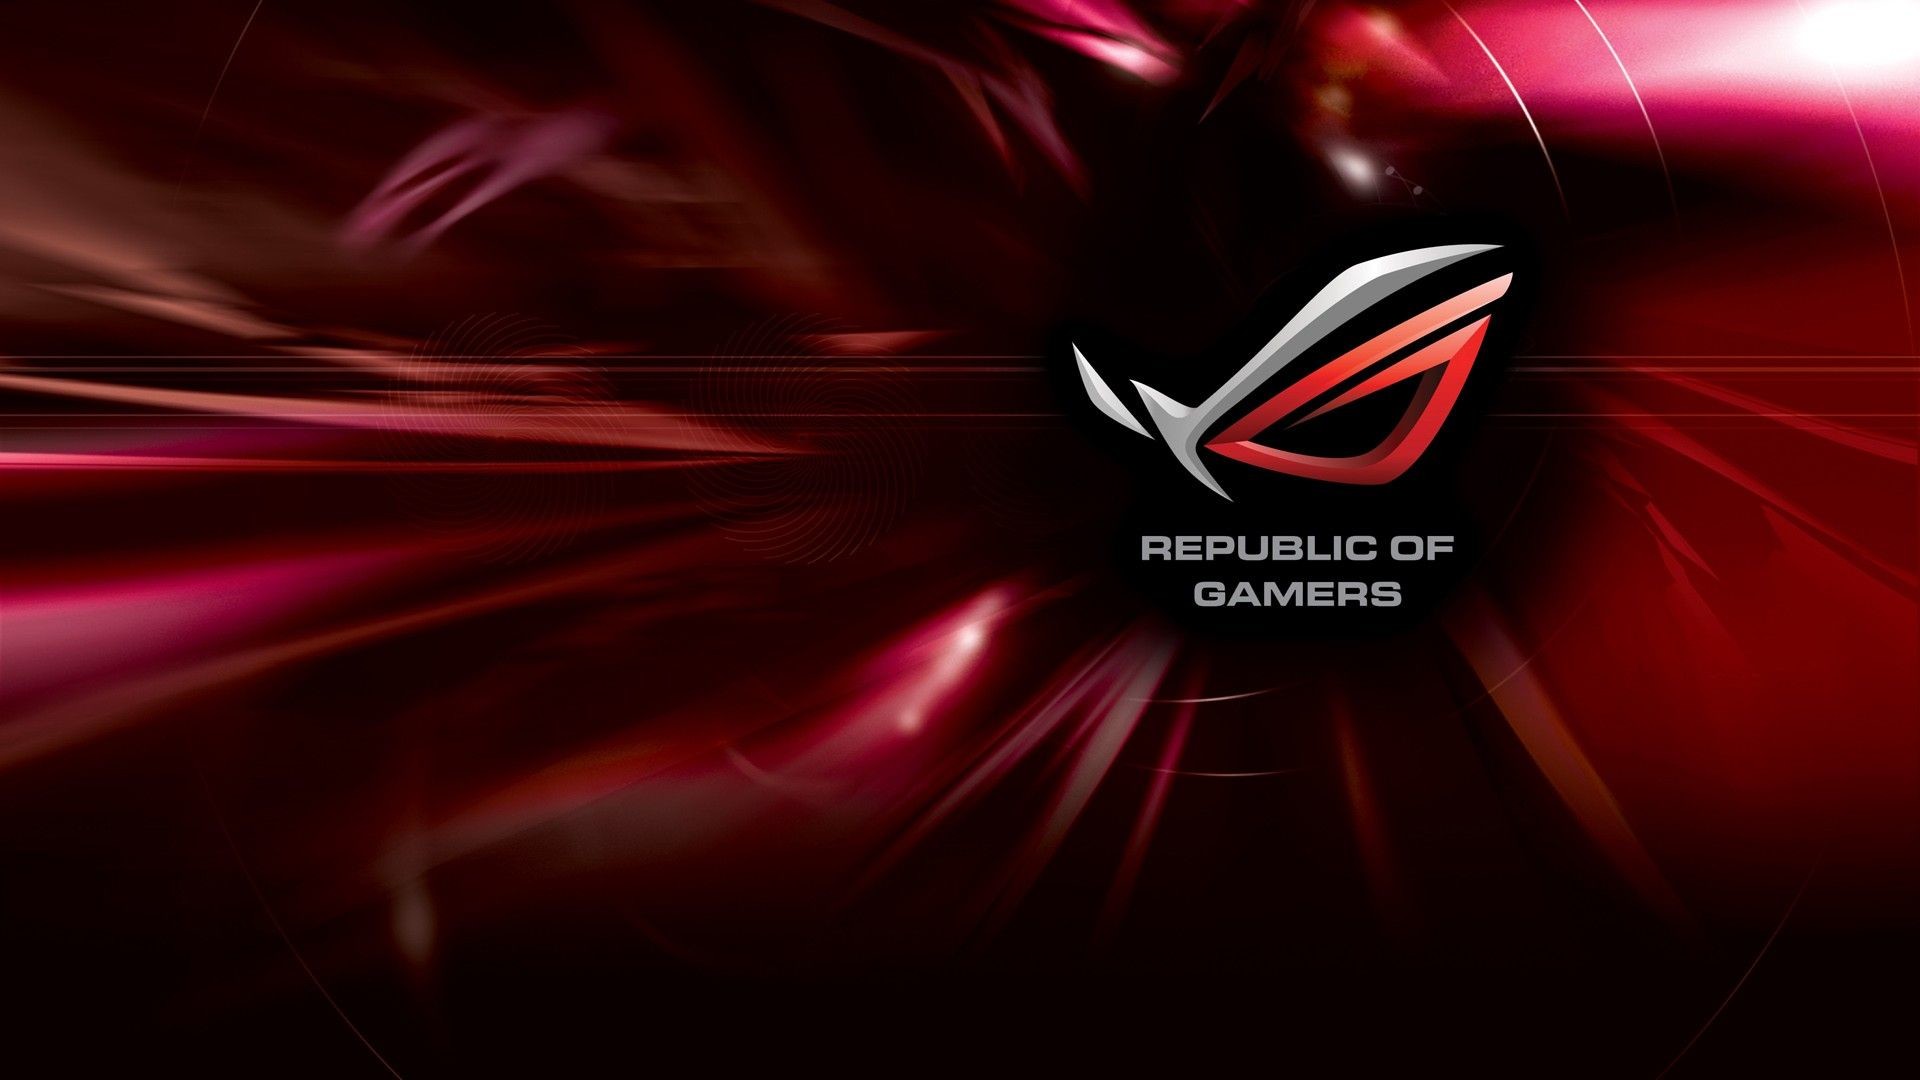 1920x1080 Get free high quality HD wallpapers asus republic of gamers wallpaper hd